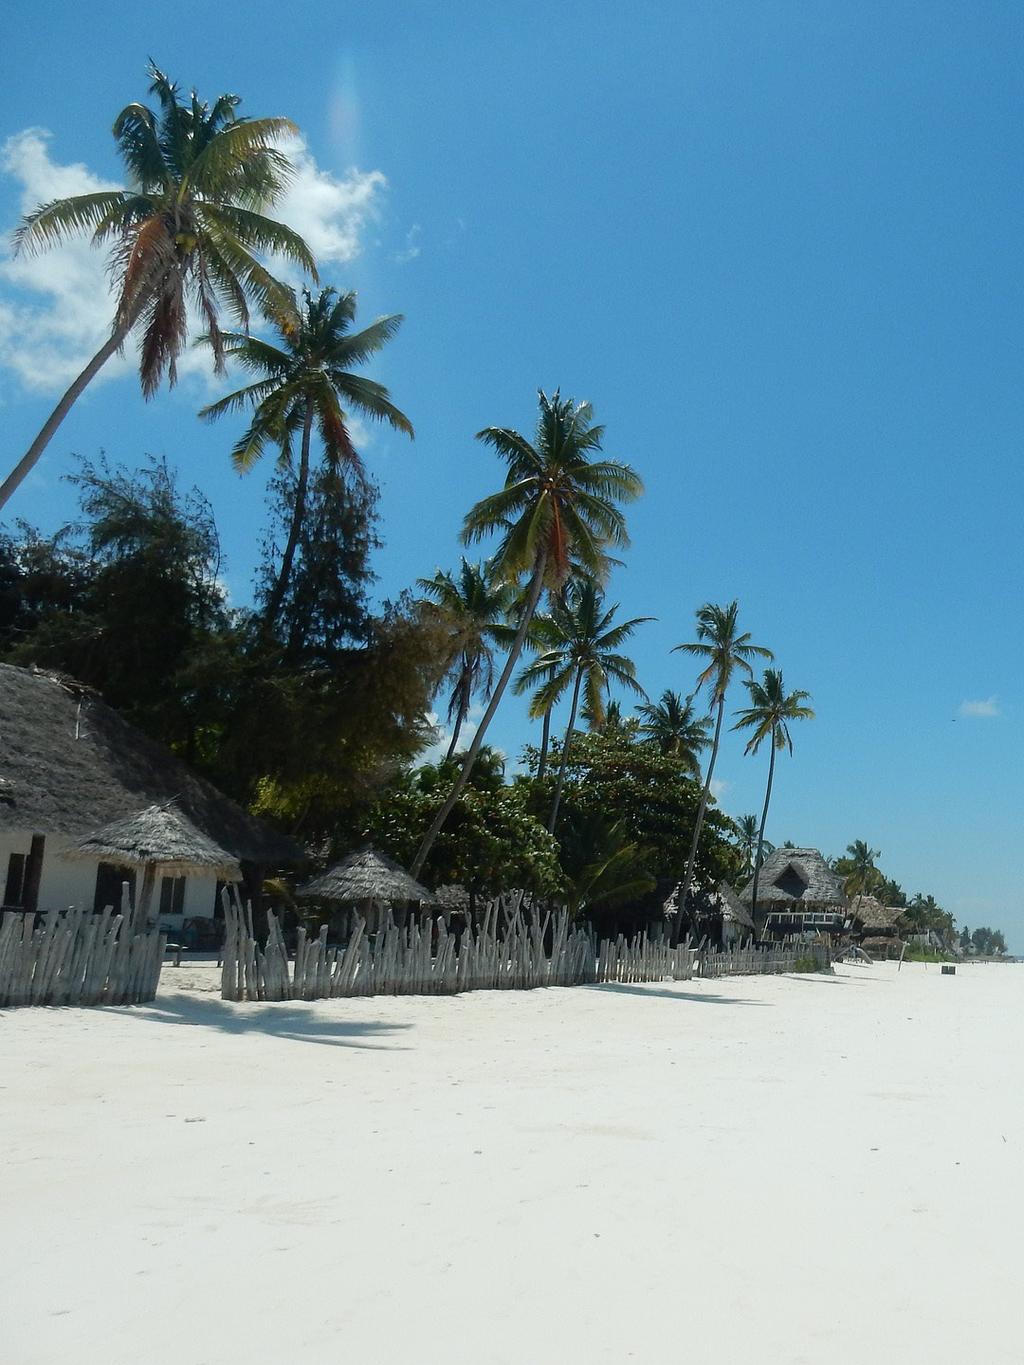 ZANZIBAR 6 DAY SOLOS TOUR: 12TH - 18TH JUNE 2019 Zanzibar! The very name evokes images of exotic spices, clear blue waters and hidden secrets. But this island paradise is so much more.